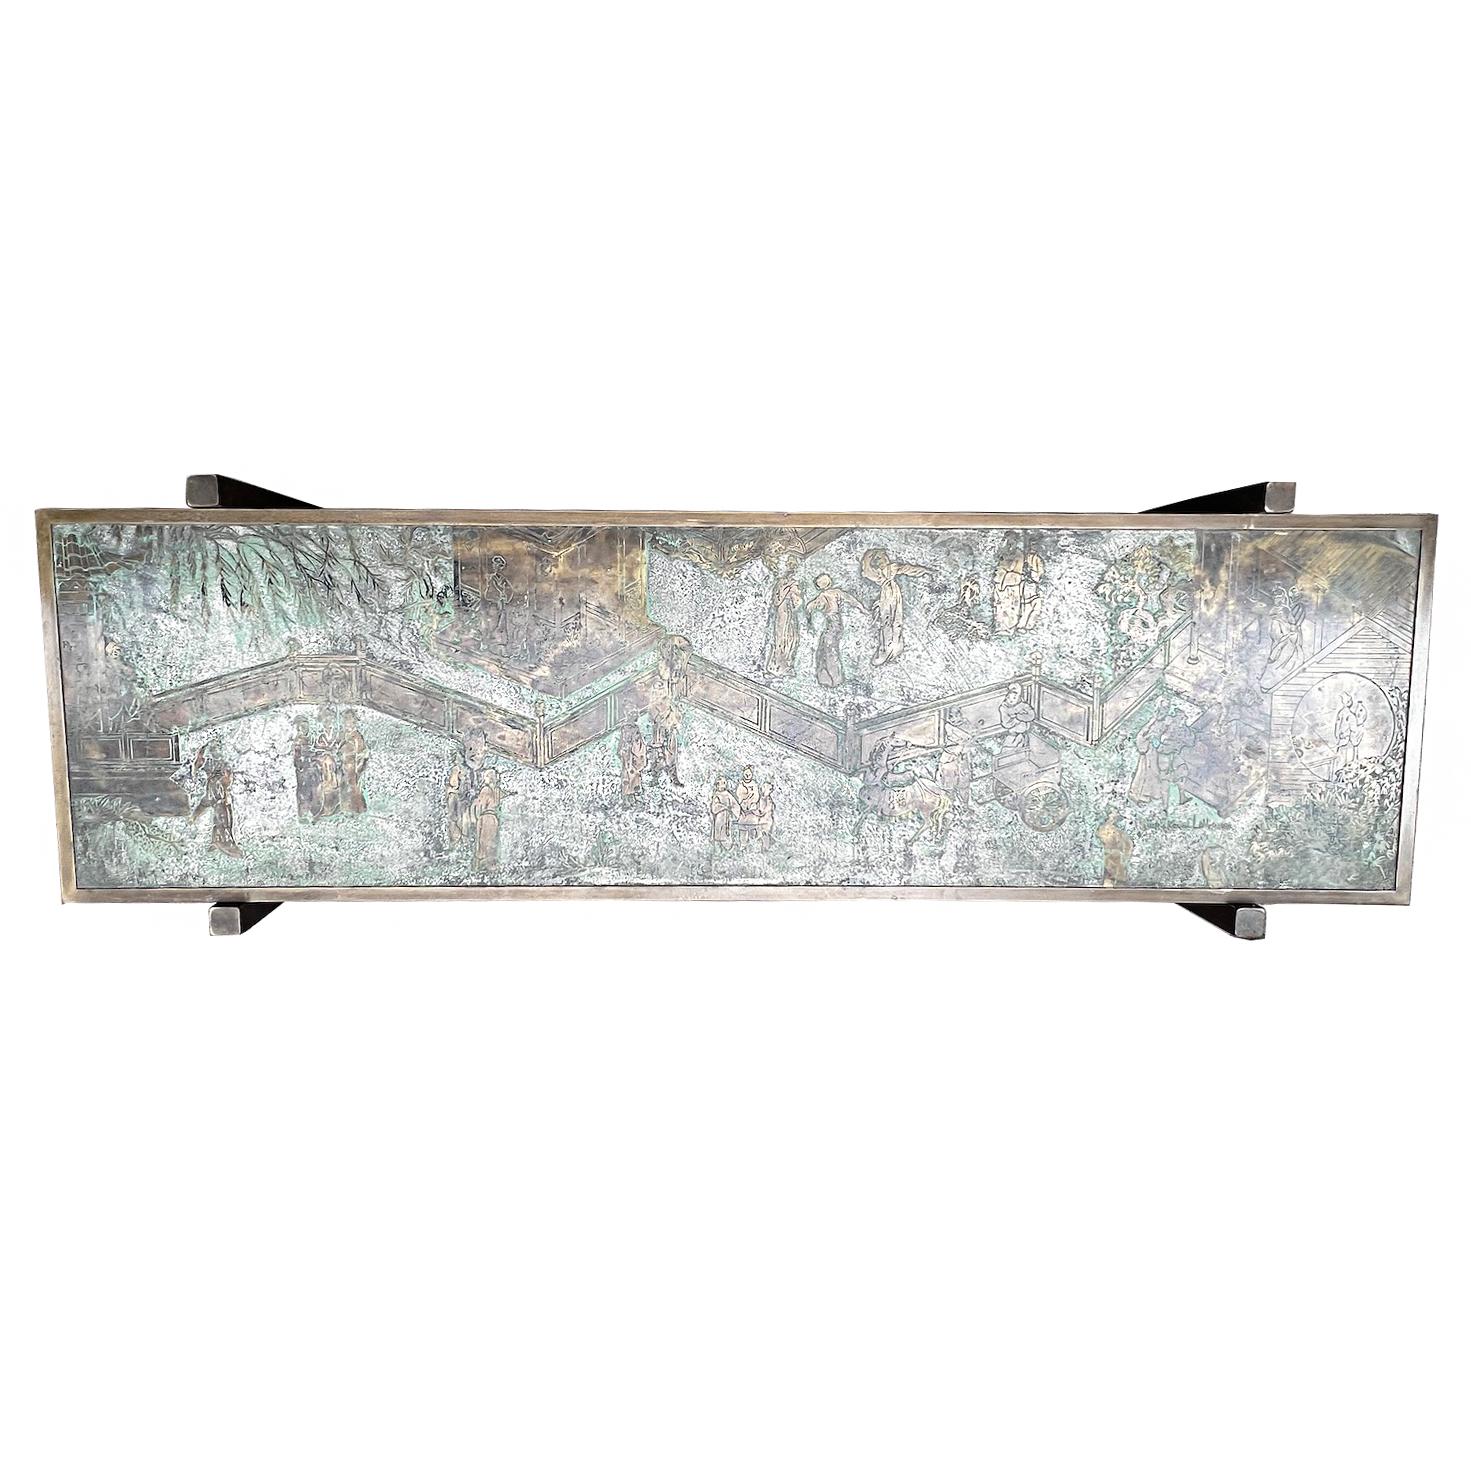 A midcentury patinated bronze coffee table with verdigris patina by LaVerne.

Measurements:
Length:69